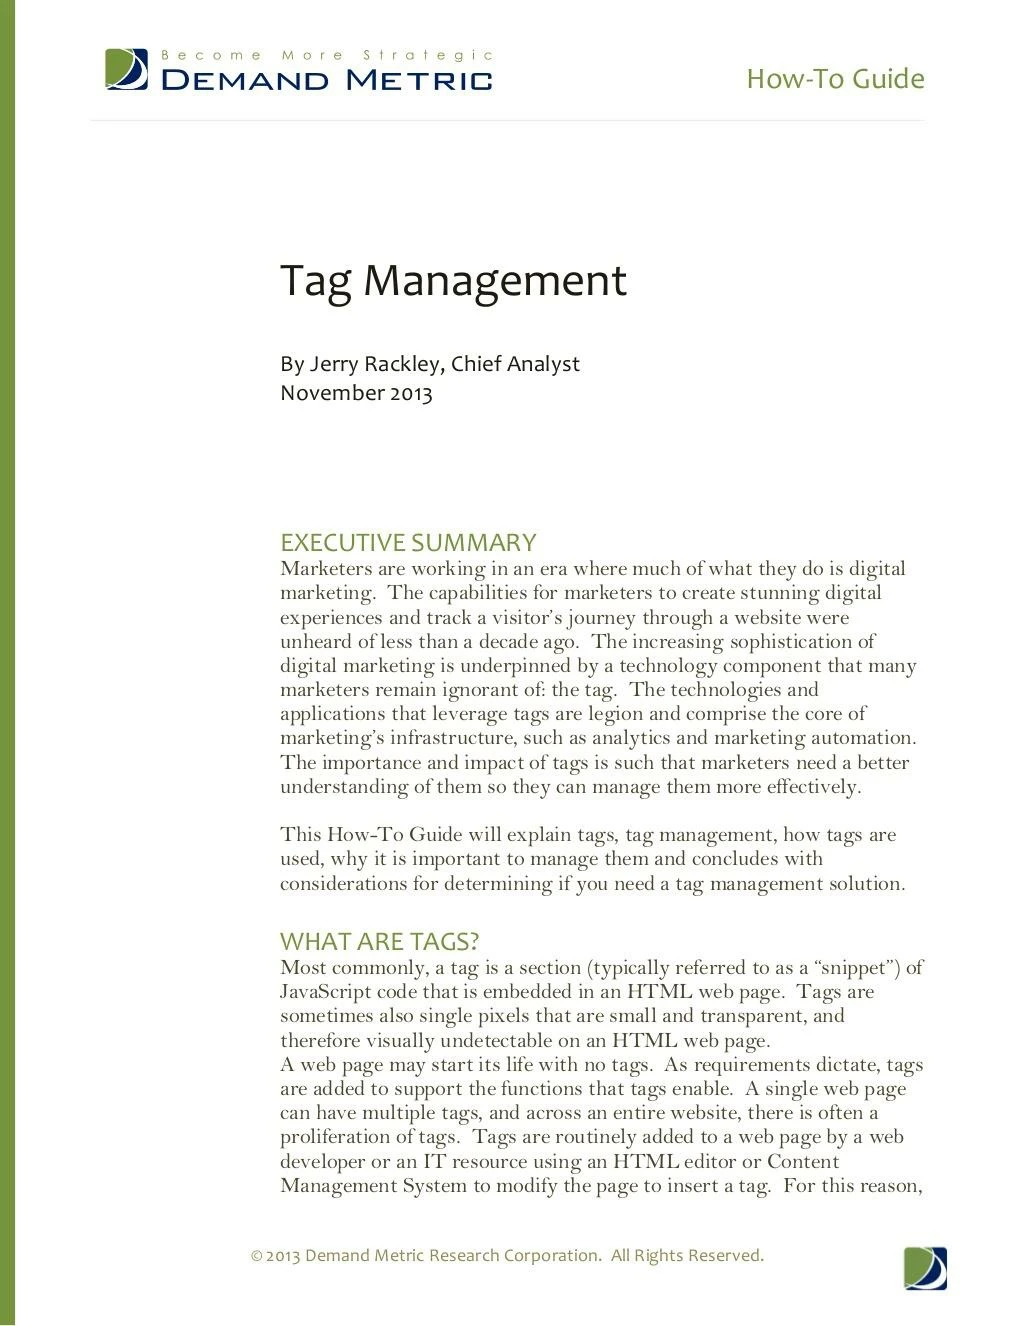 how to guide tag management